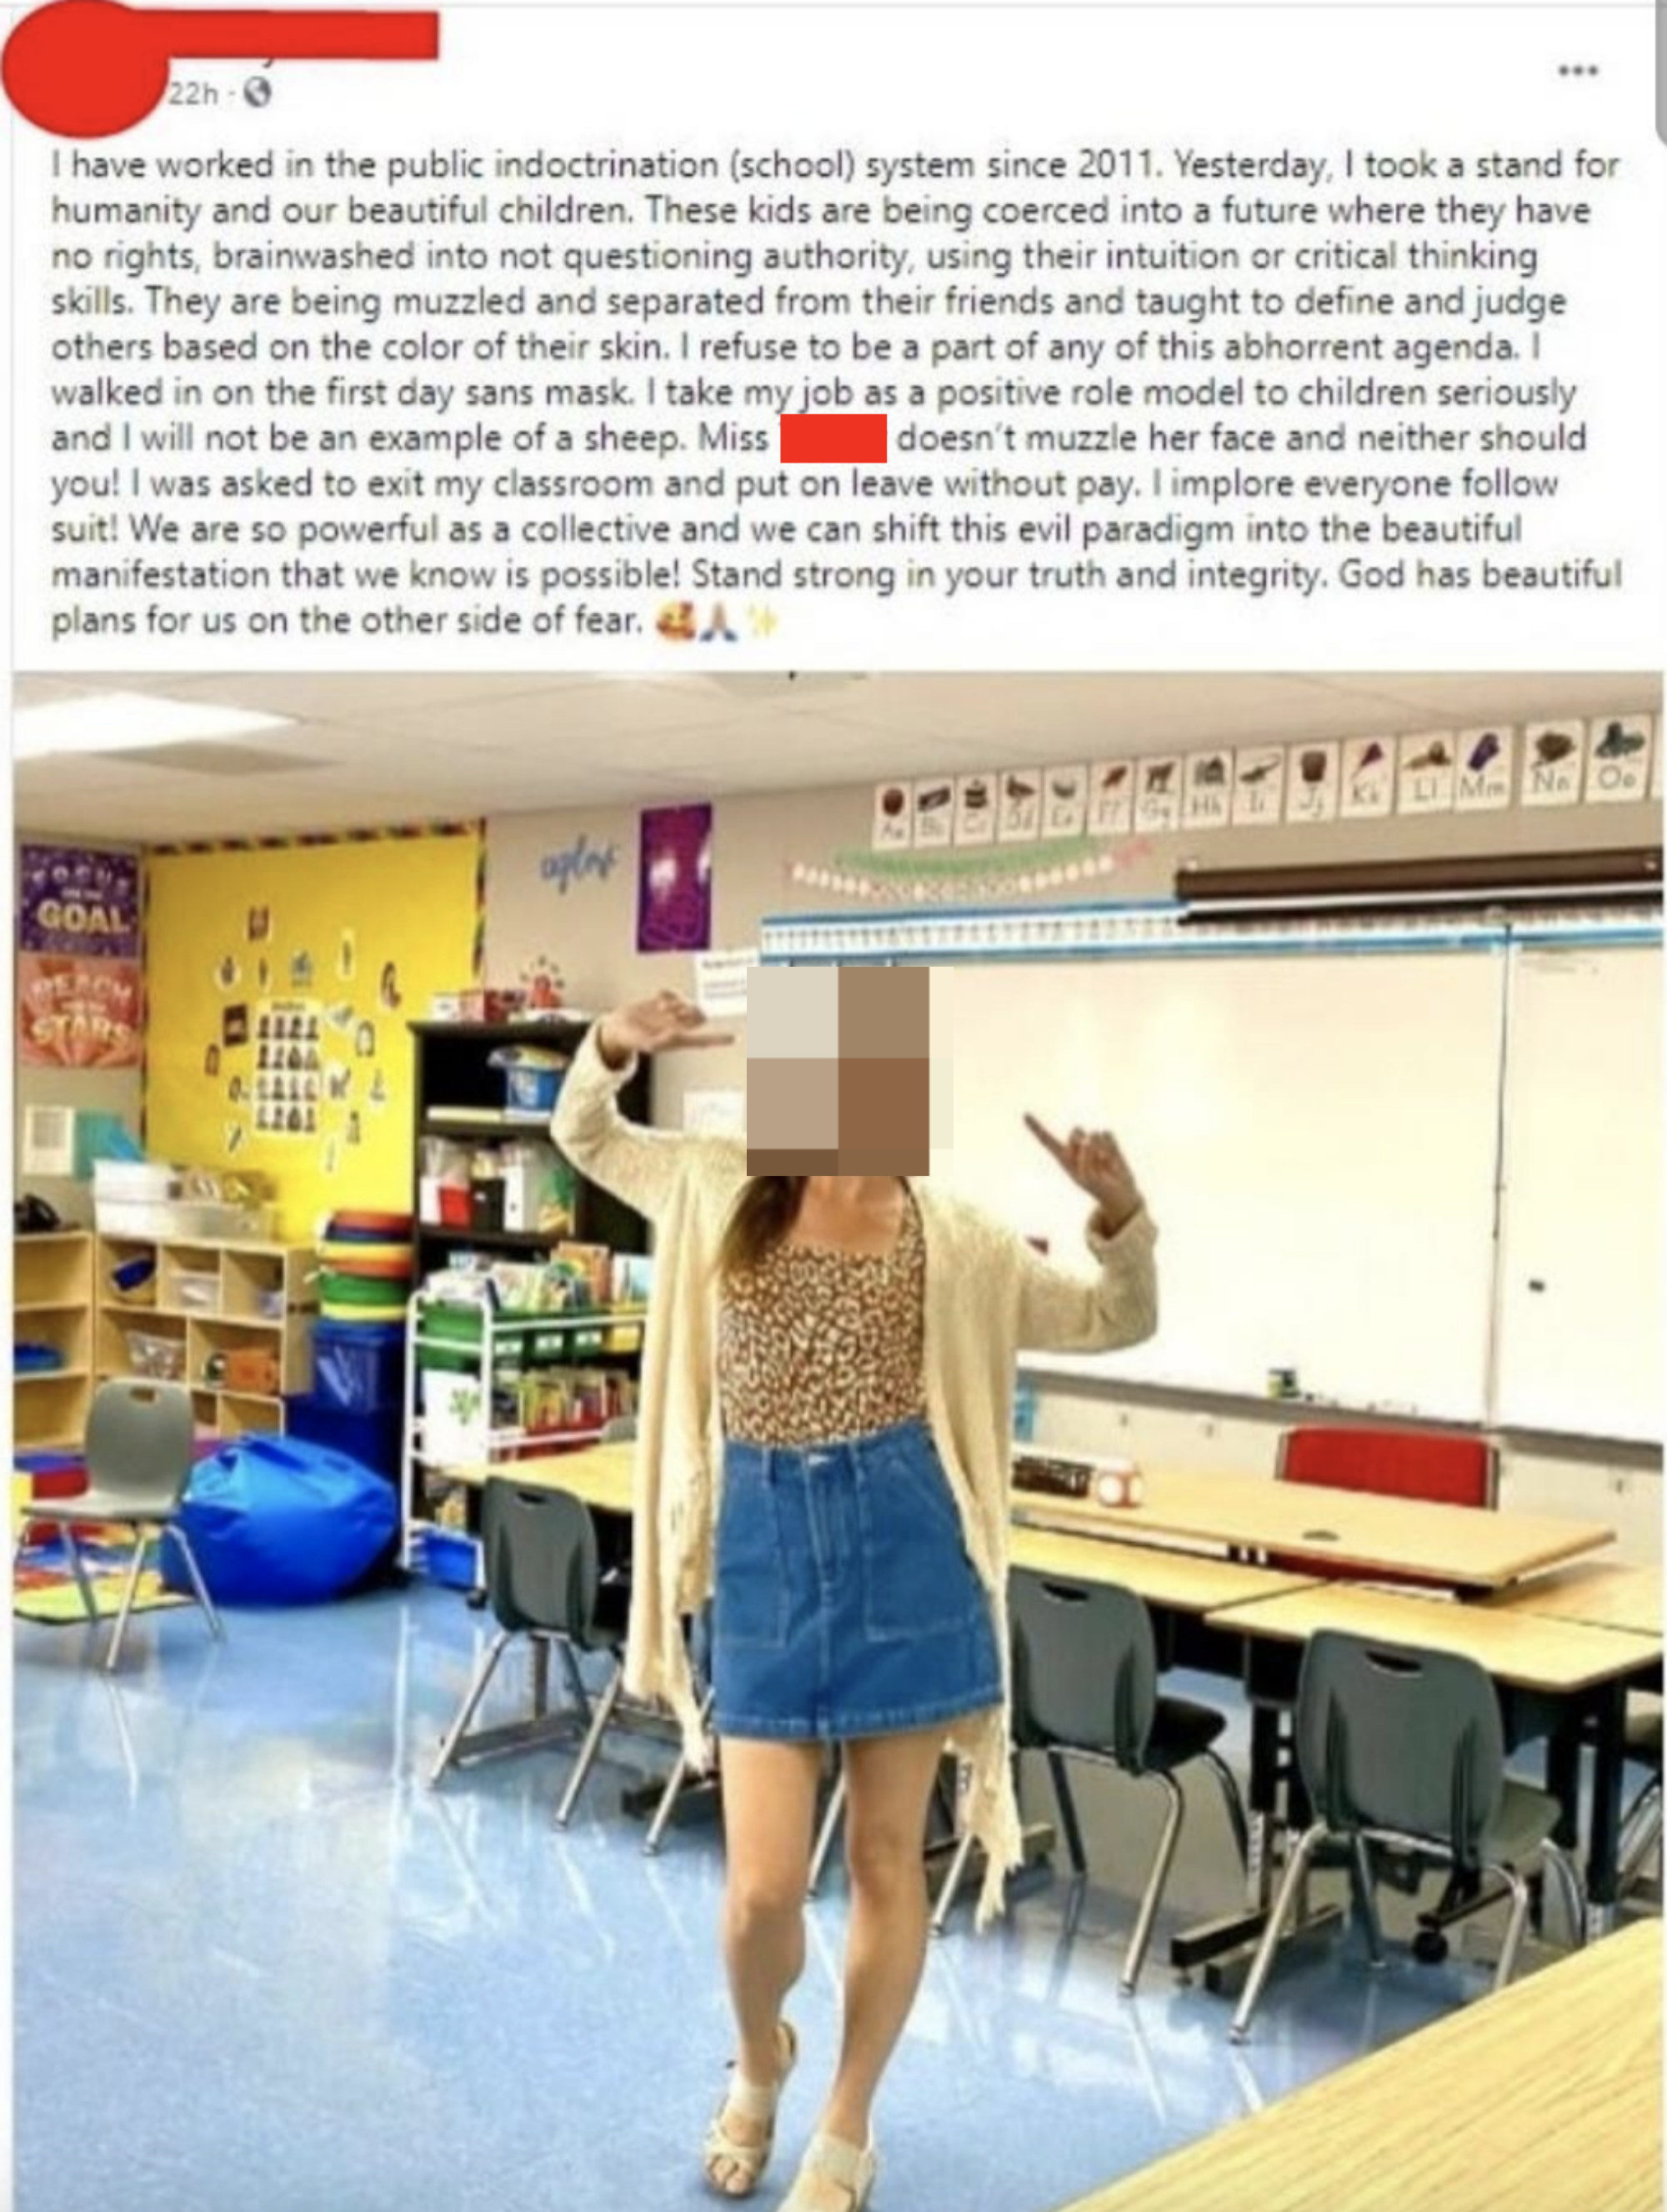 Teacher&#x27;s Facebook status: &quot;These kids are being coerced into a future where they have no rights and brainwashed into questioning authority&quot;